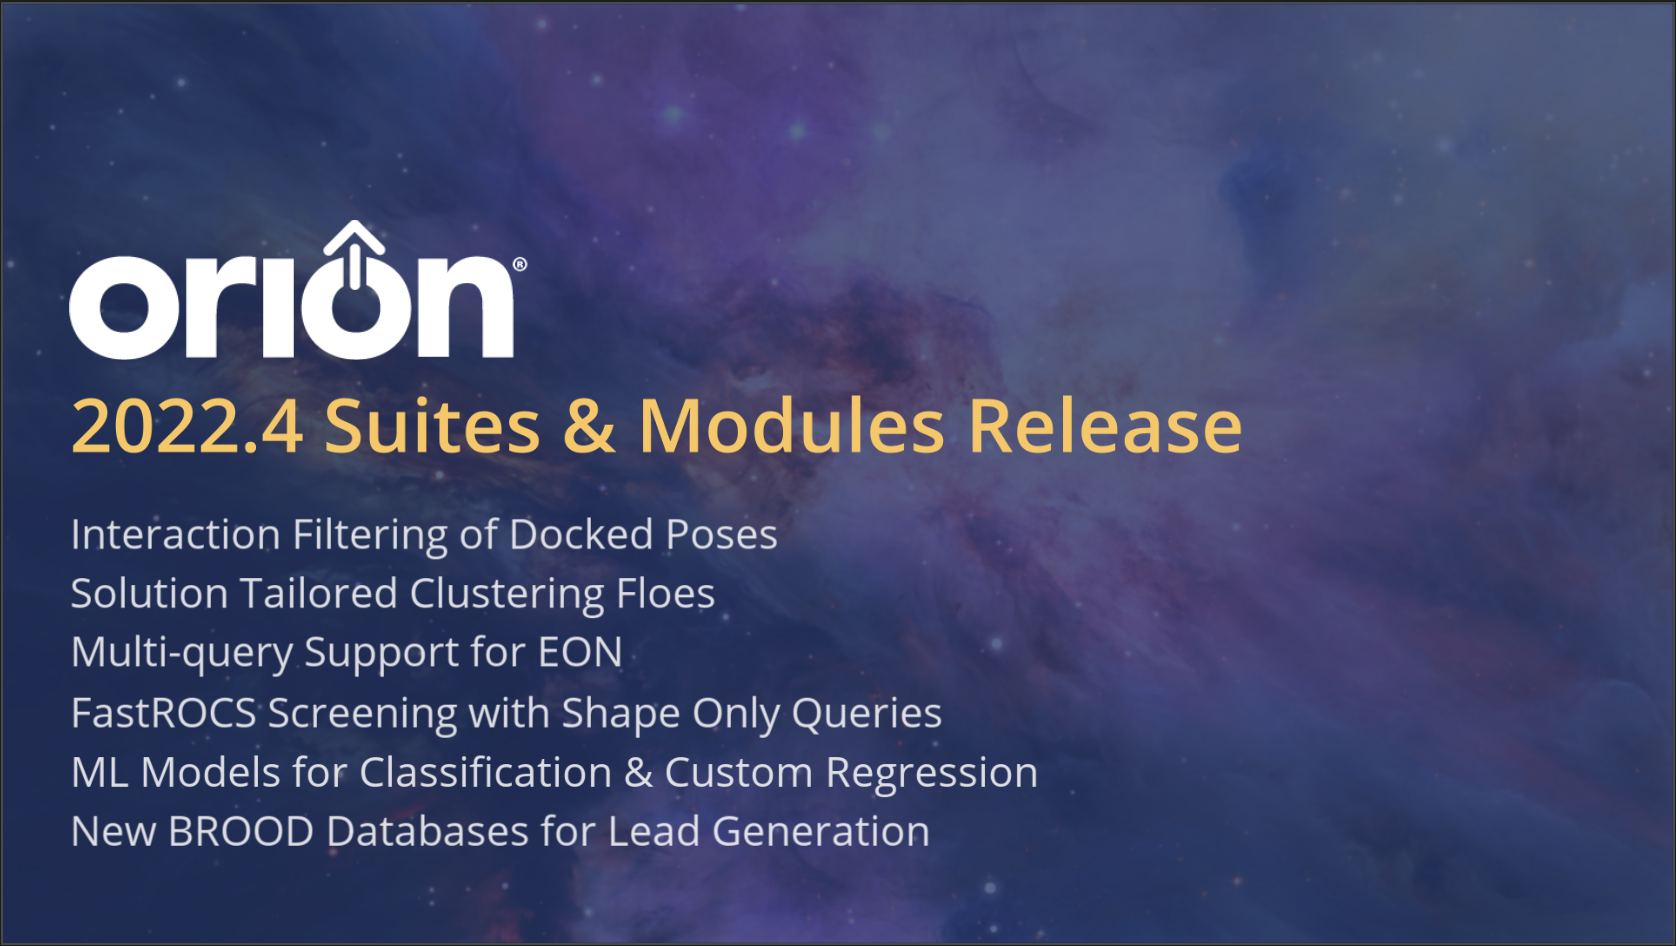 OpenEye announces the release of the 2022.4 Orion® Suites and Modules